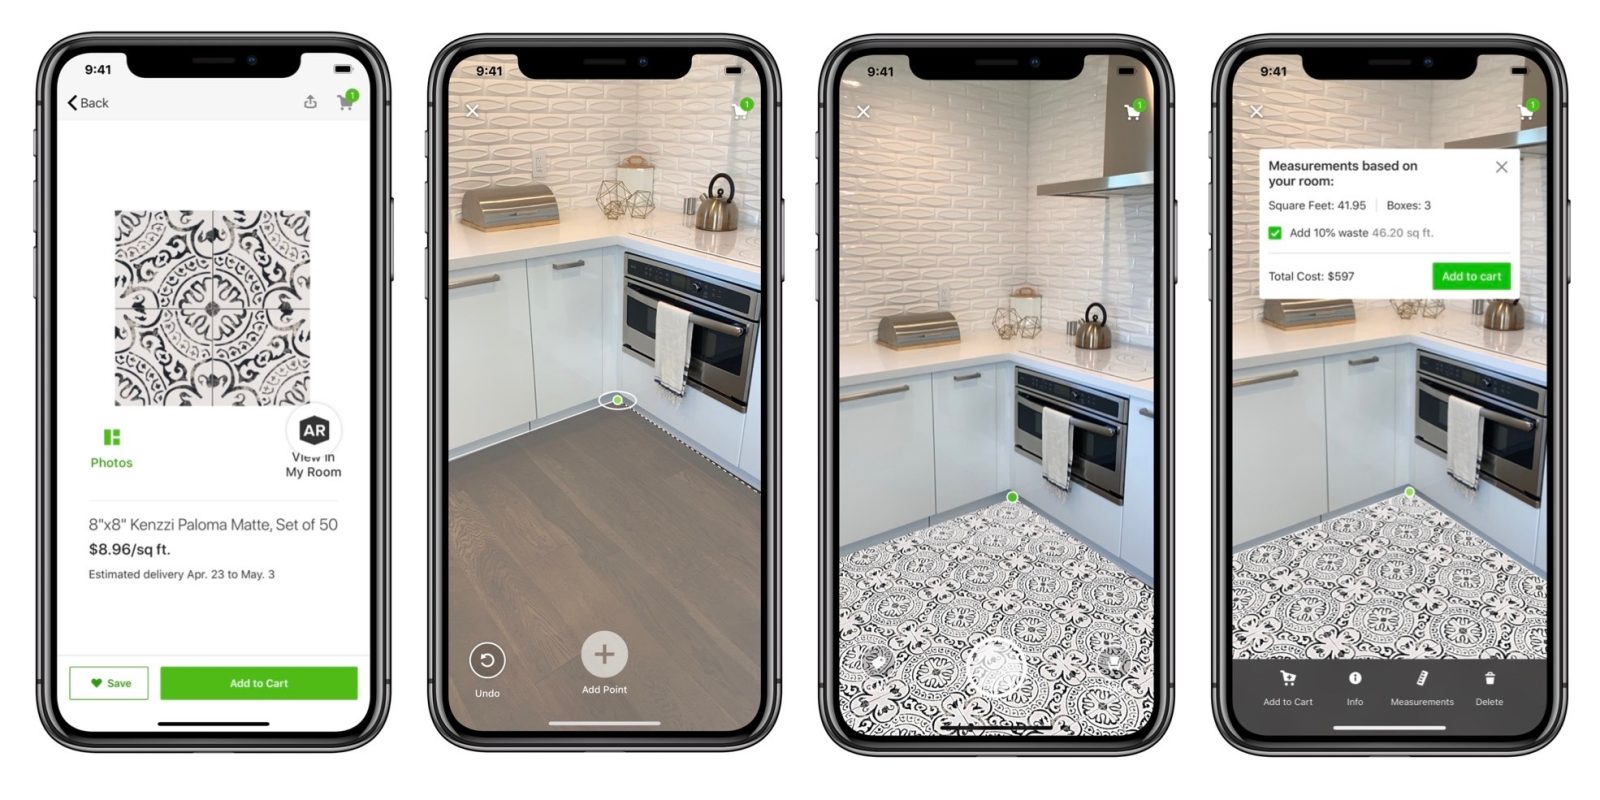 Houzz app gets 'View in My Room 3D' tool update, now able to place tile flooring in AR - 9to5Mac